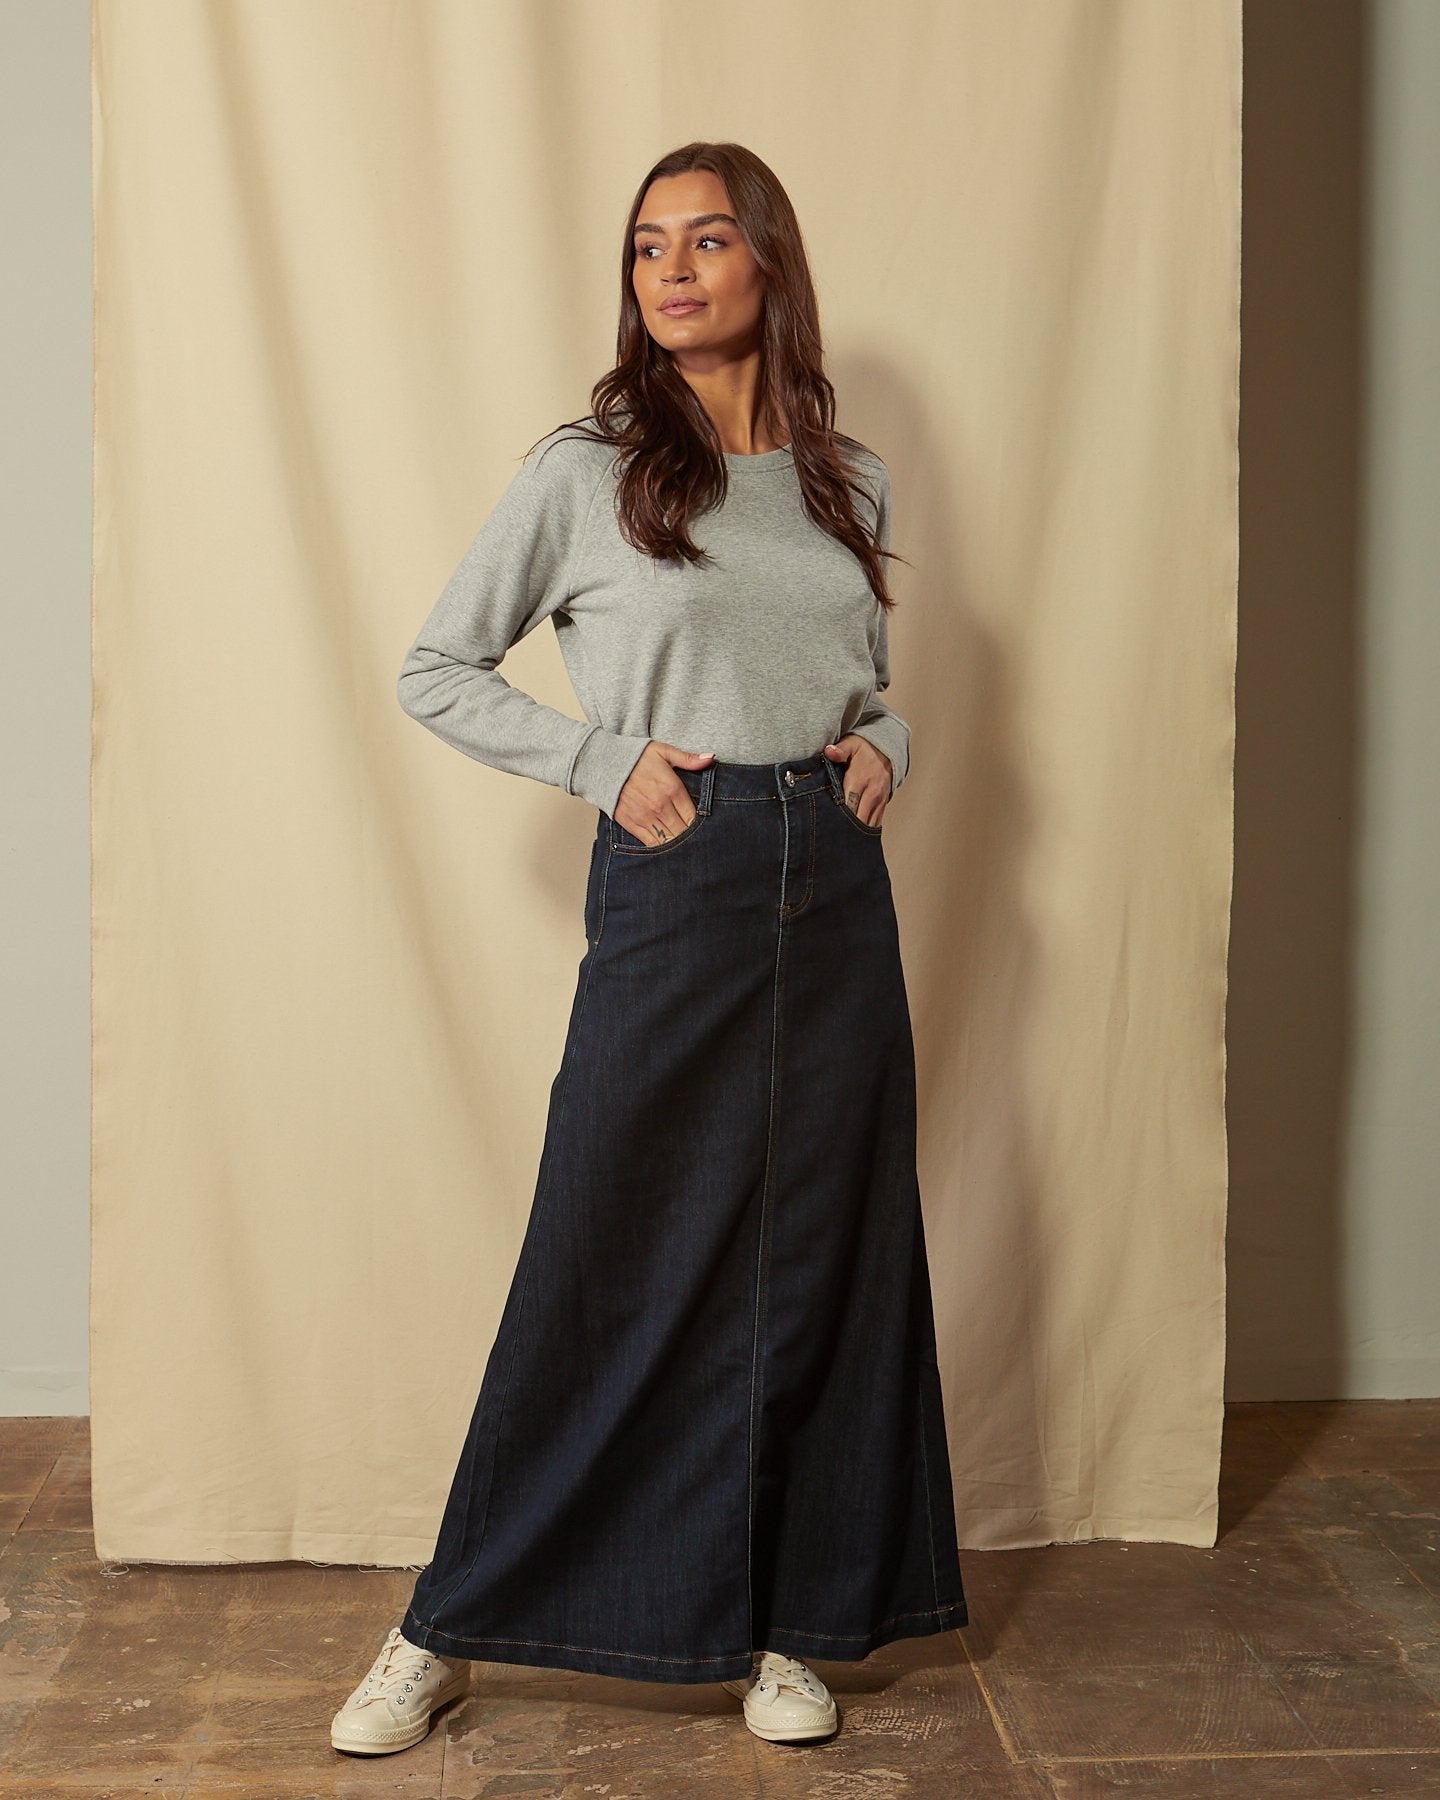 Full-length front view of model with hands in front pockets of dark blue A-line style denim skirt.